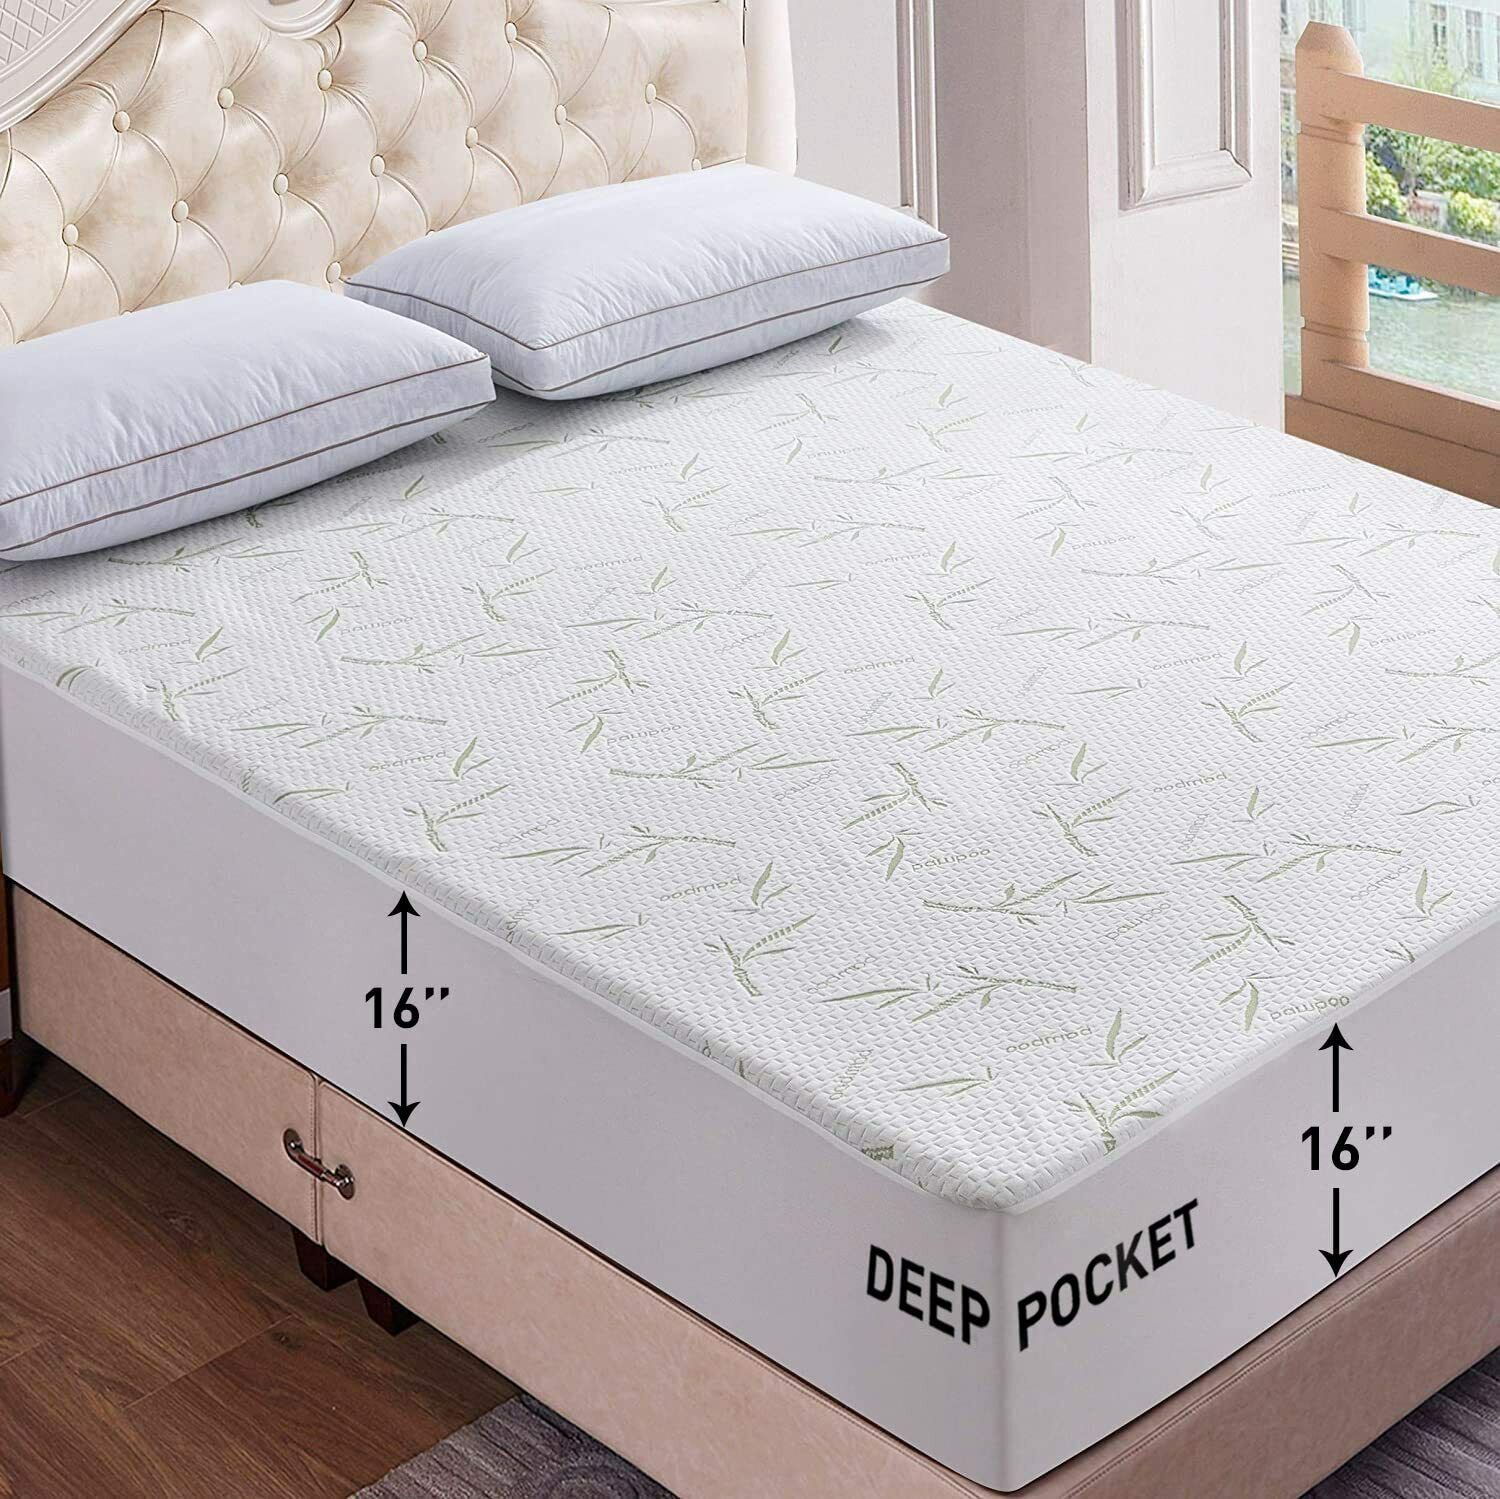 Bamboo Waterproof Mattress Protector Quilted Breathable Premium Mattress Cover